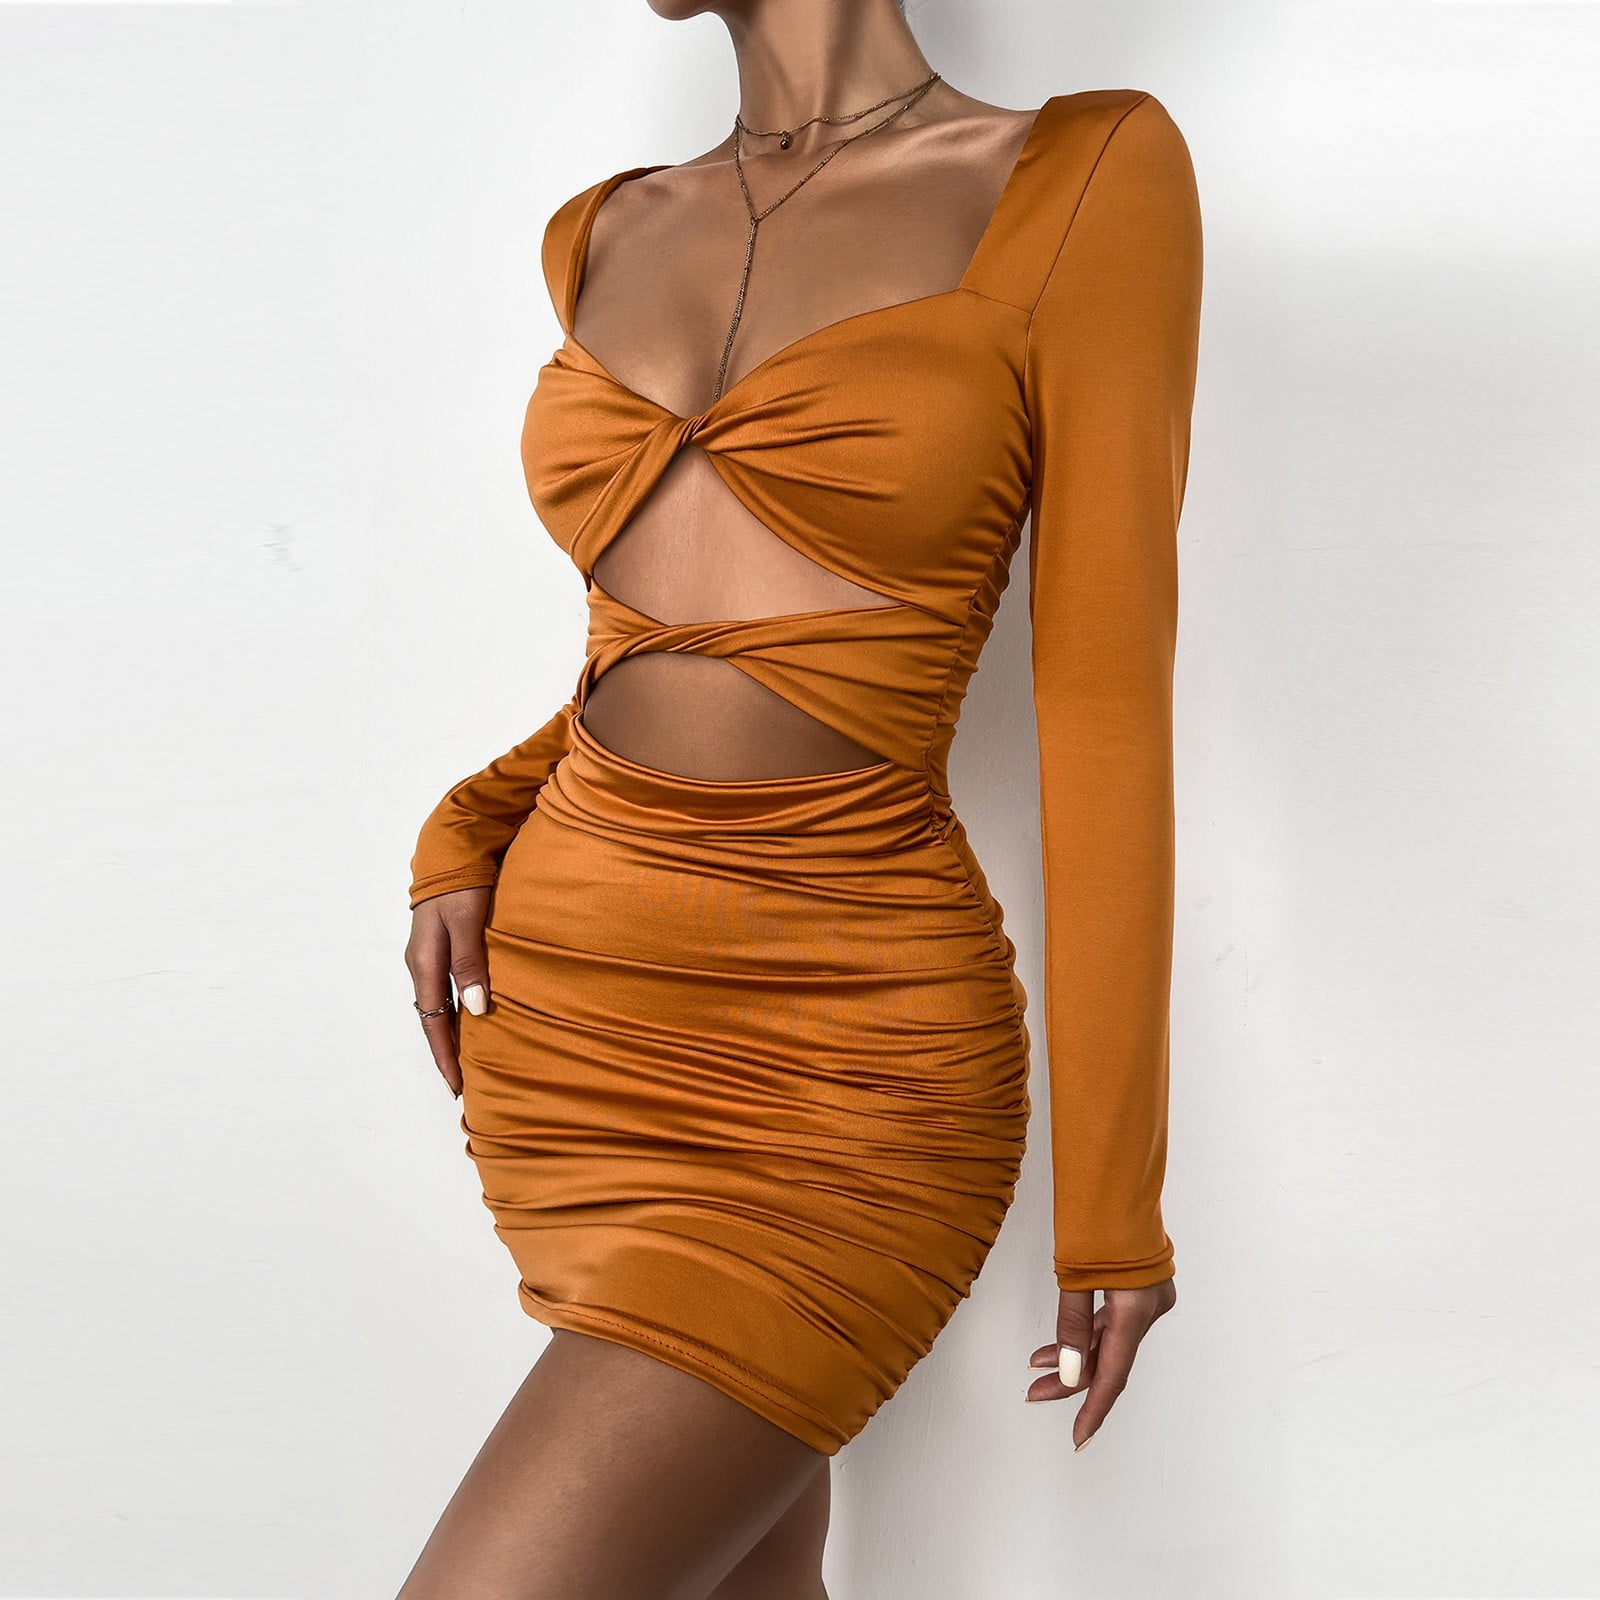 Levmjia Summer Dresses For Women Plus Size Clearance Sexy Fashion Long  Sleeve Solid Color Slim Hollowing Party Club Dress Orange